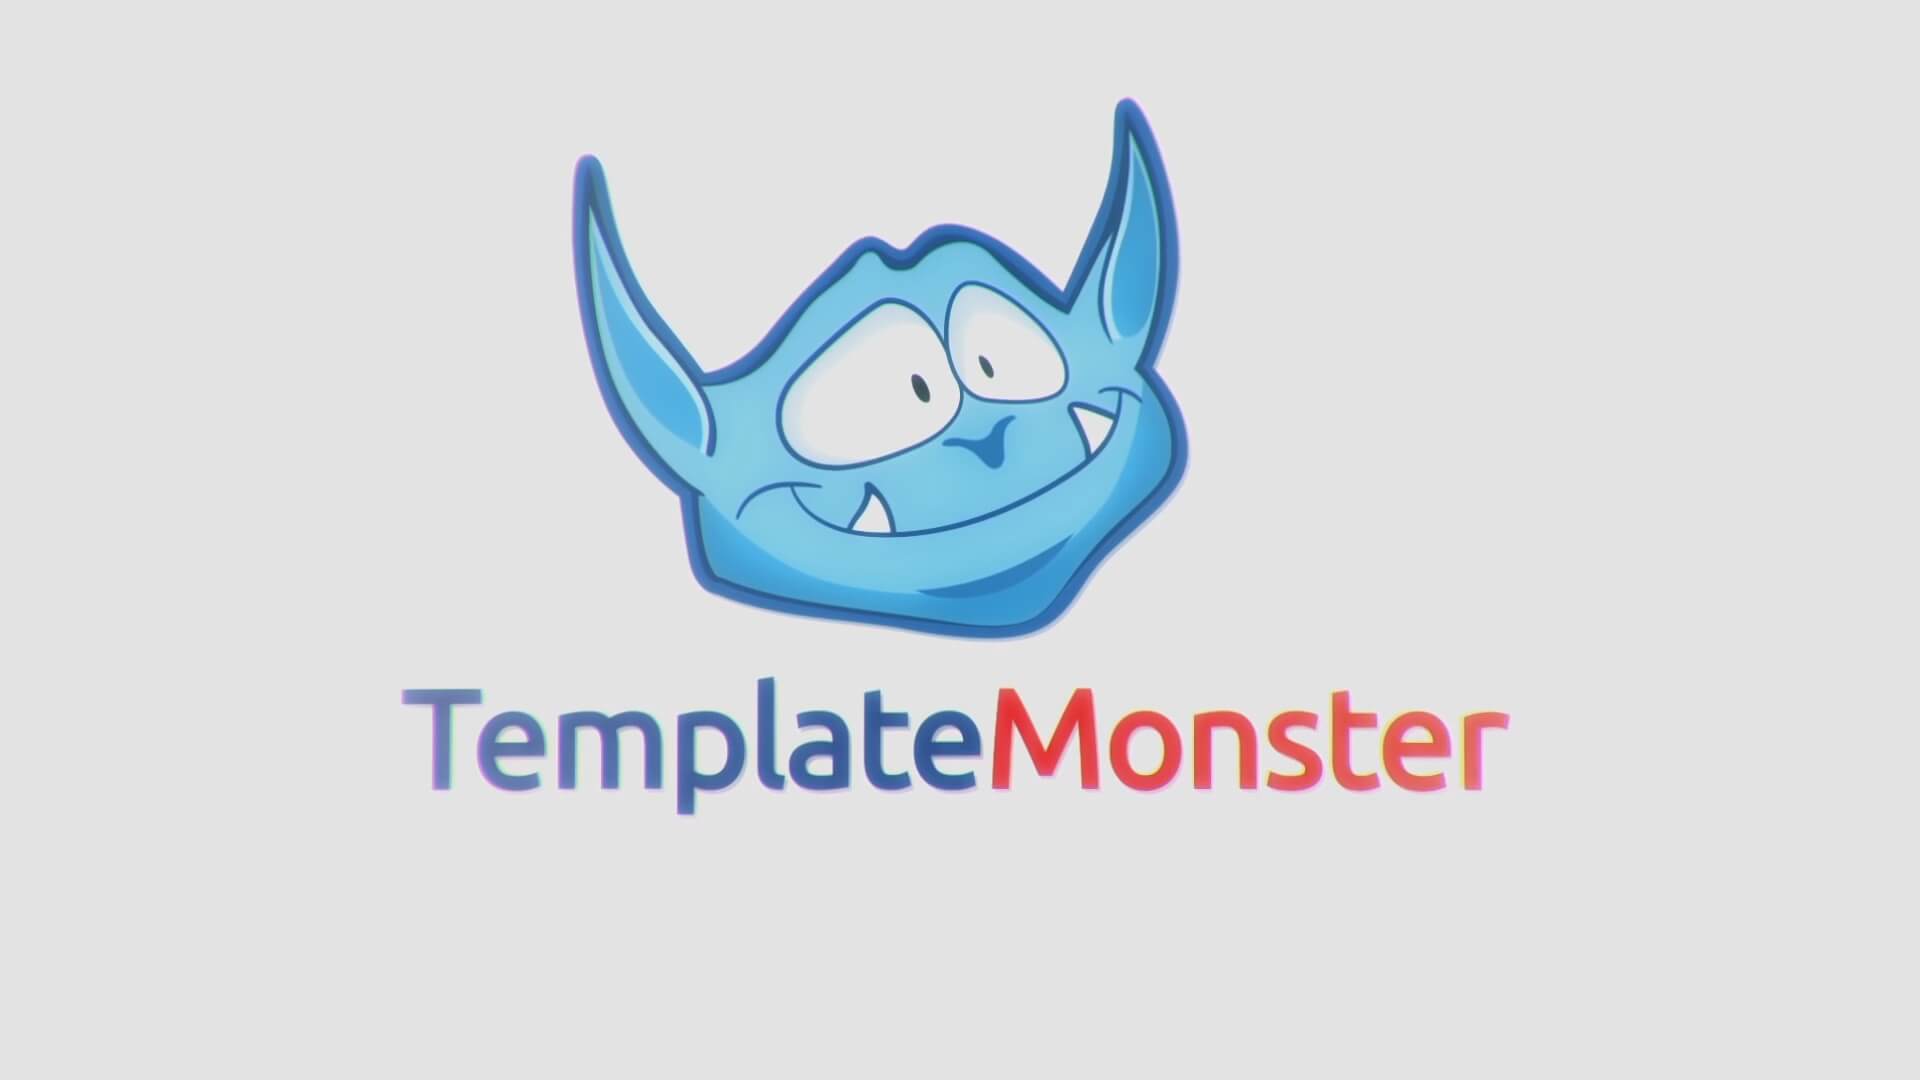 Who is TemplateMonster